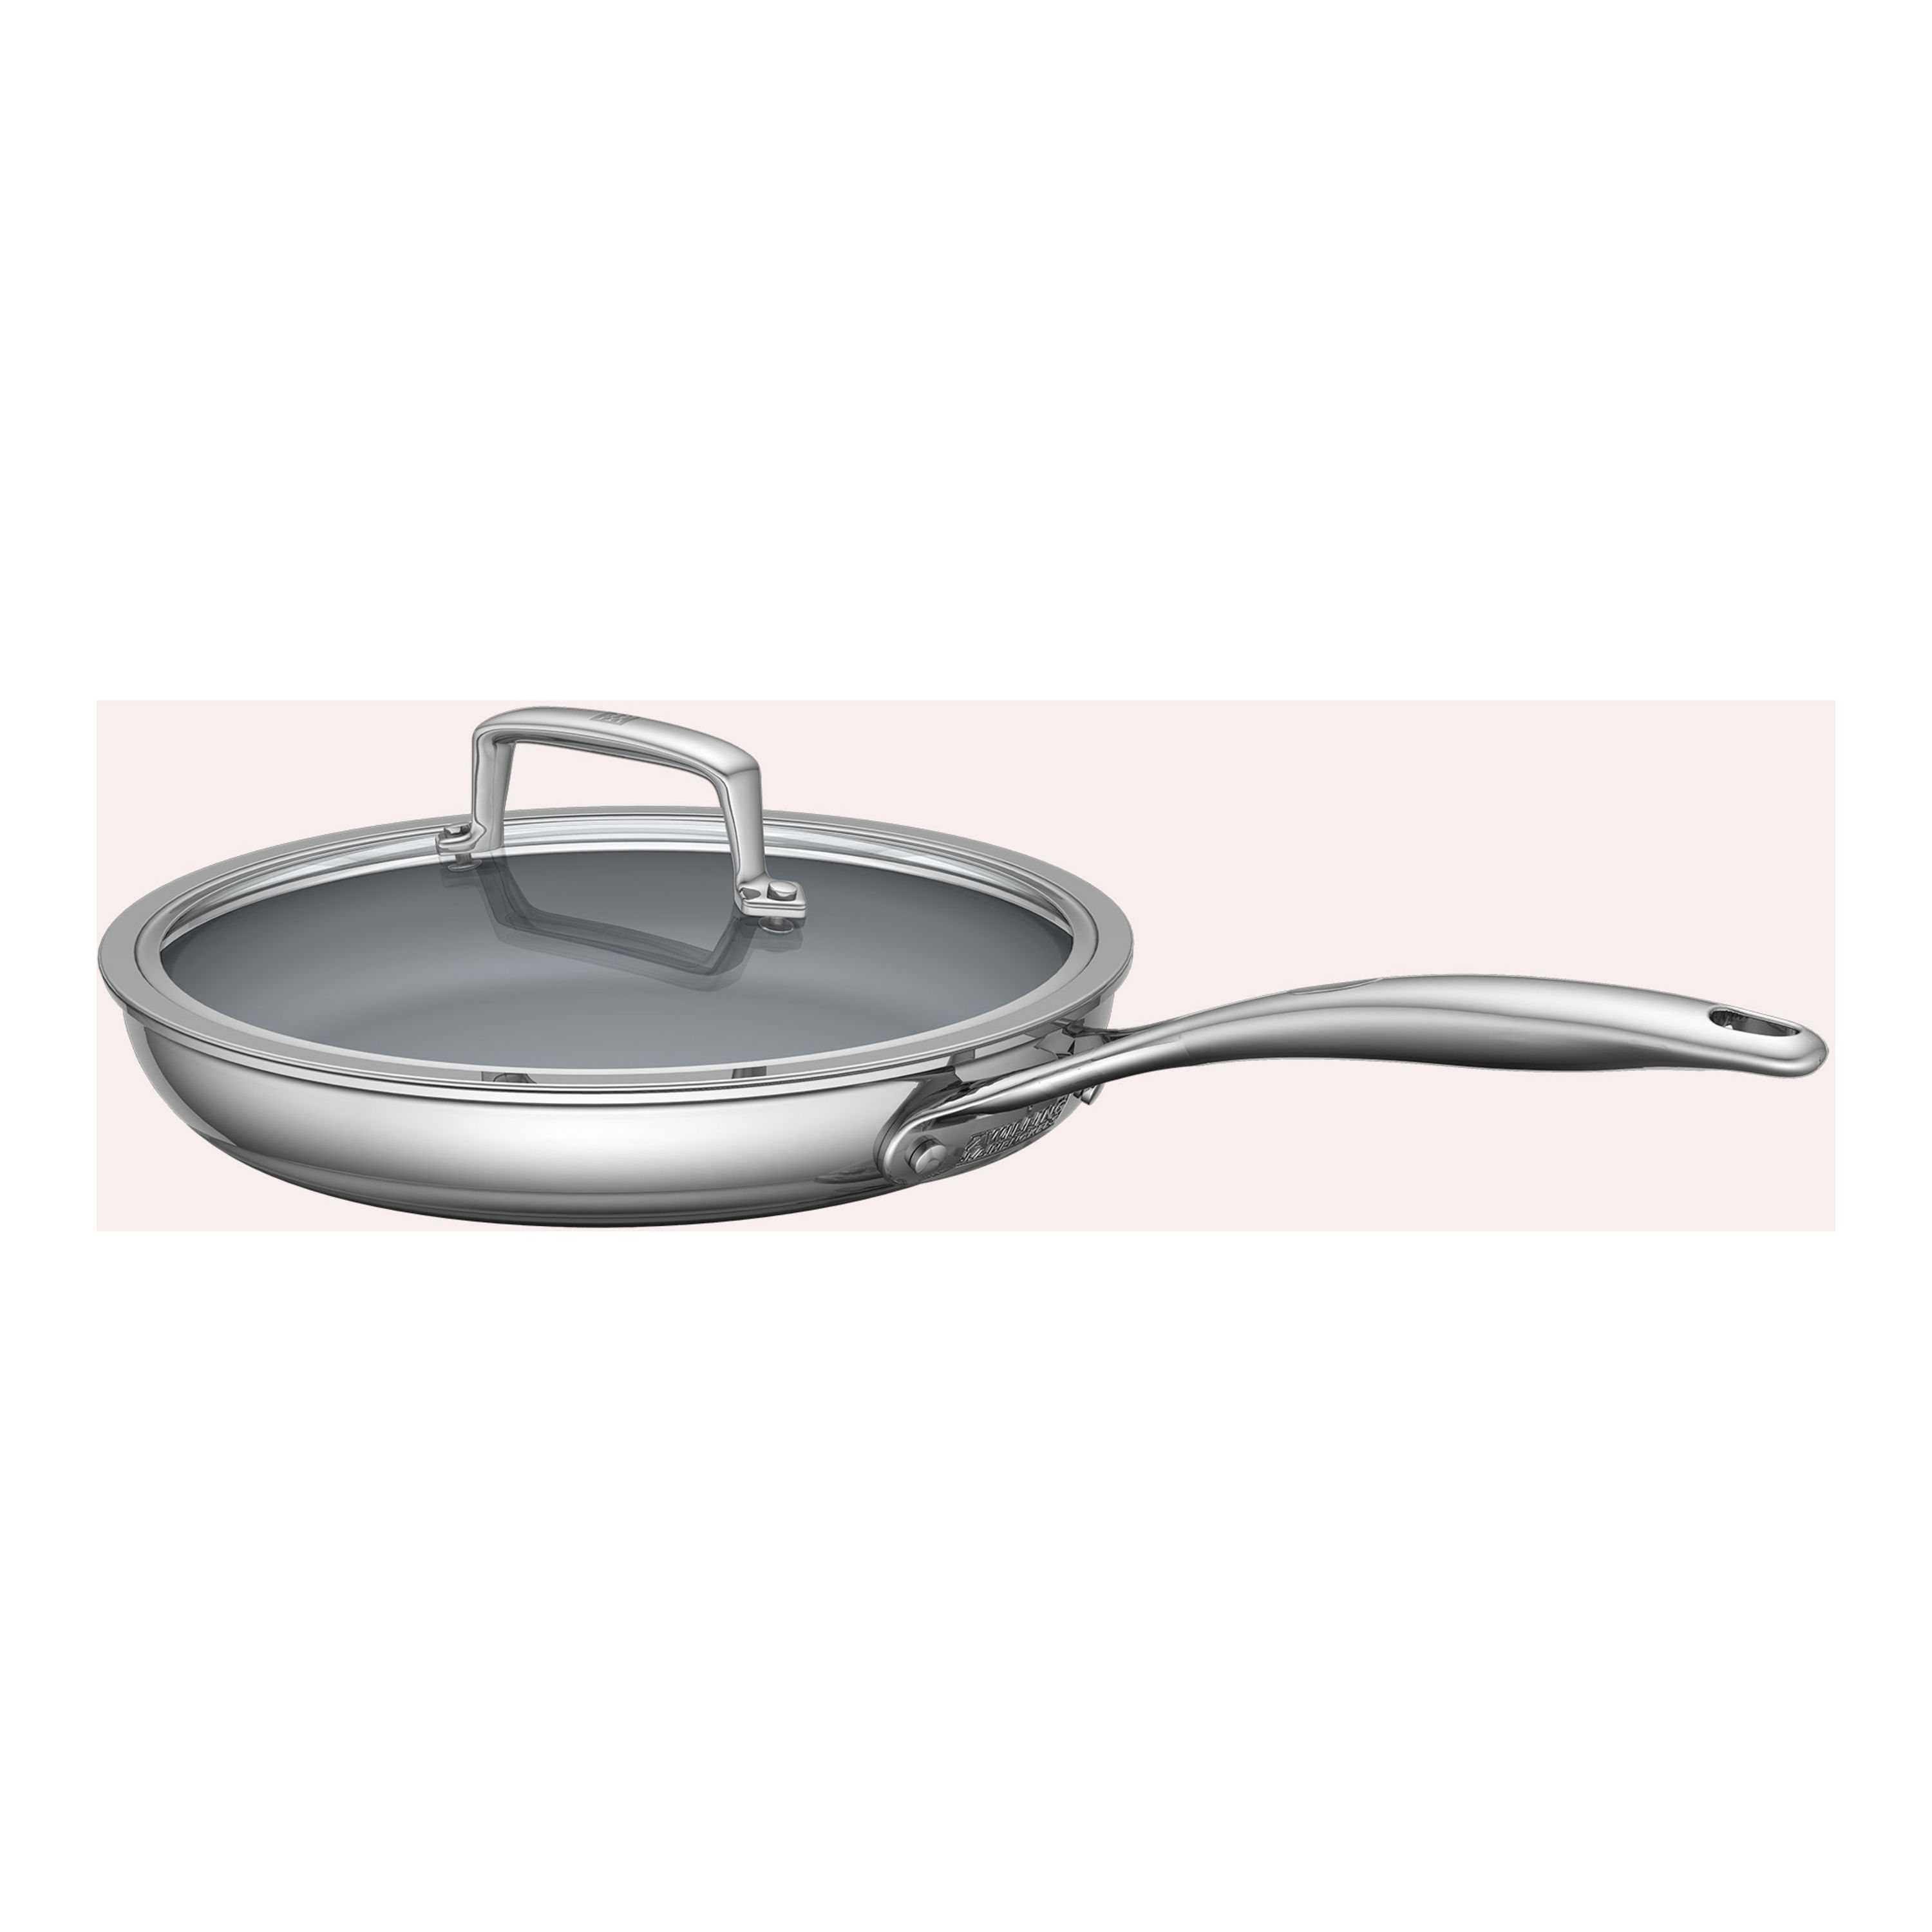 Zwilling Energy Plus 10-Inch Stainless Steel Ceramic Nonstick Fry Pan with Lid